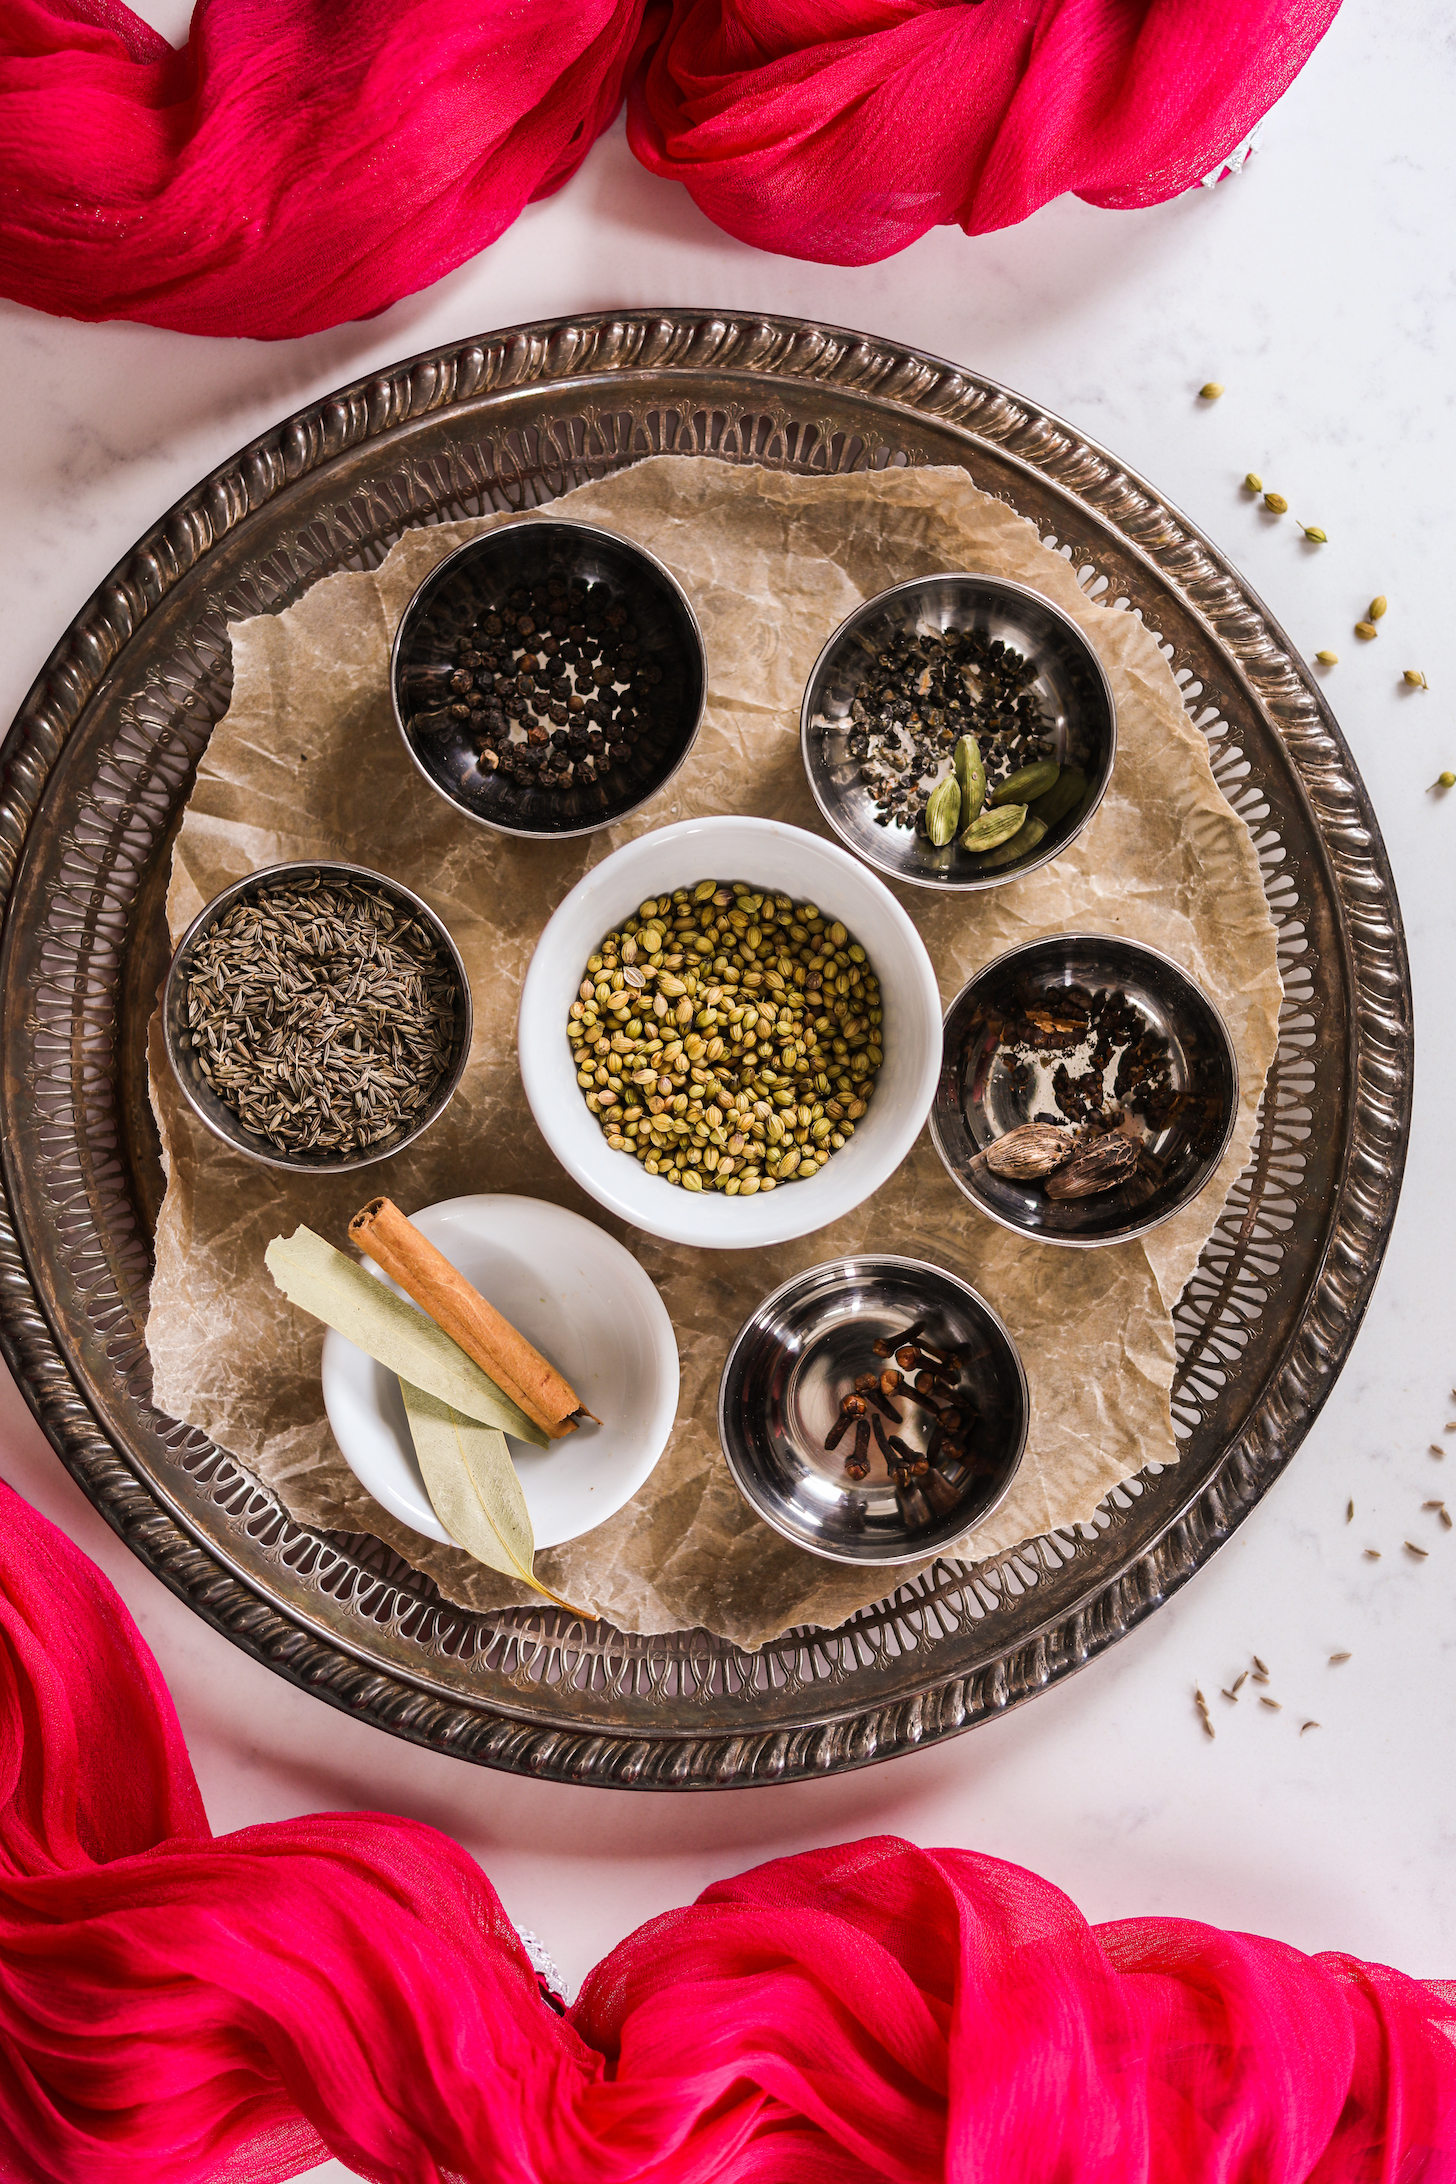 A round tray with ramekins of whole South Asian spices like cloves, cardamoms, coriander seeds and more.